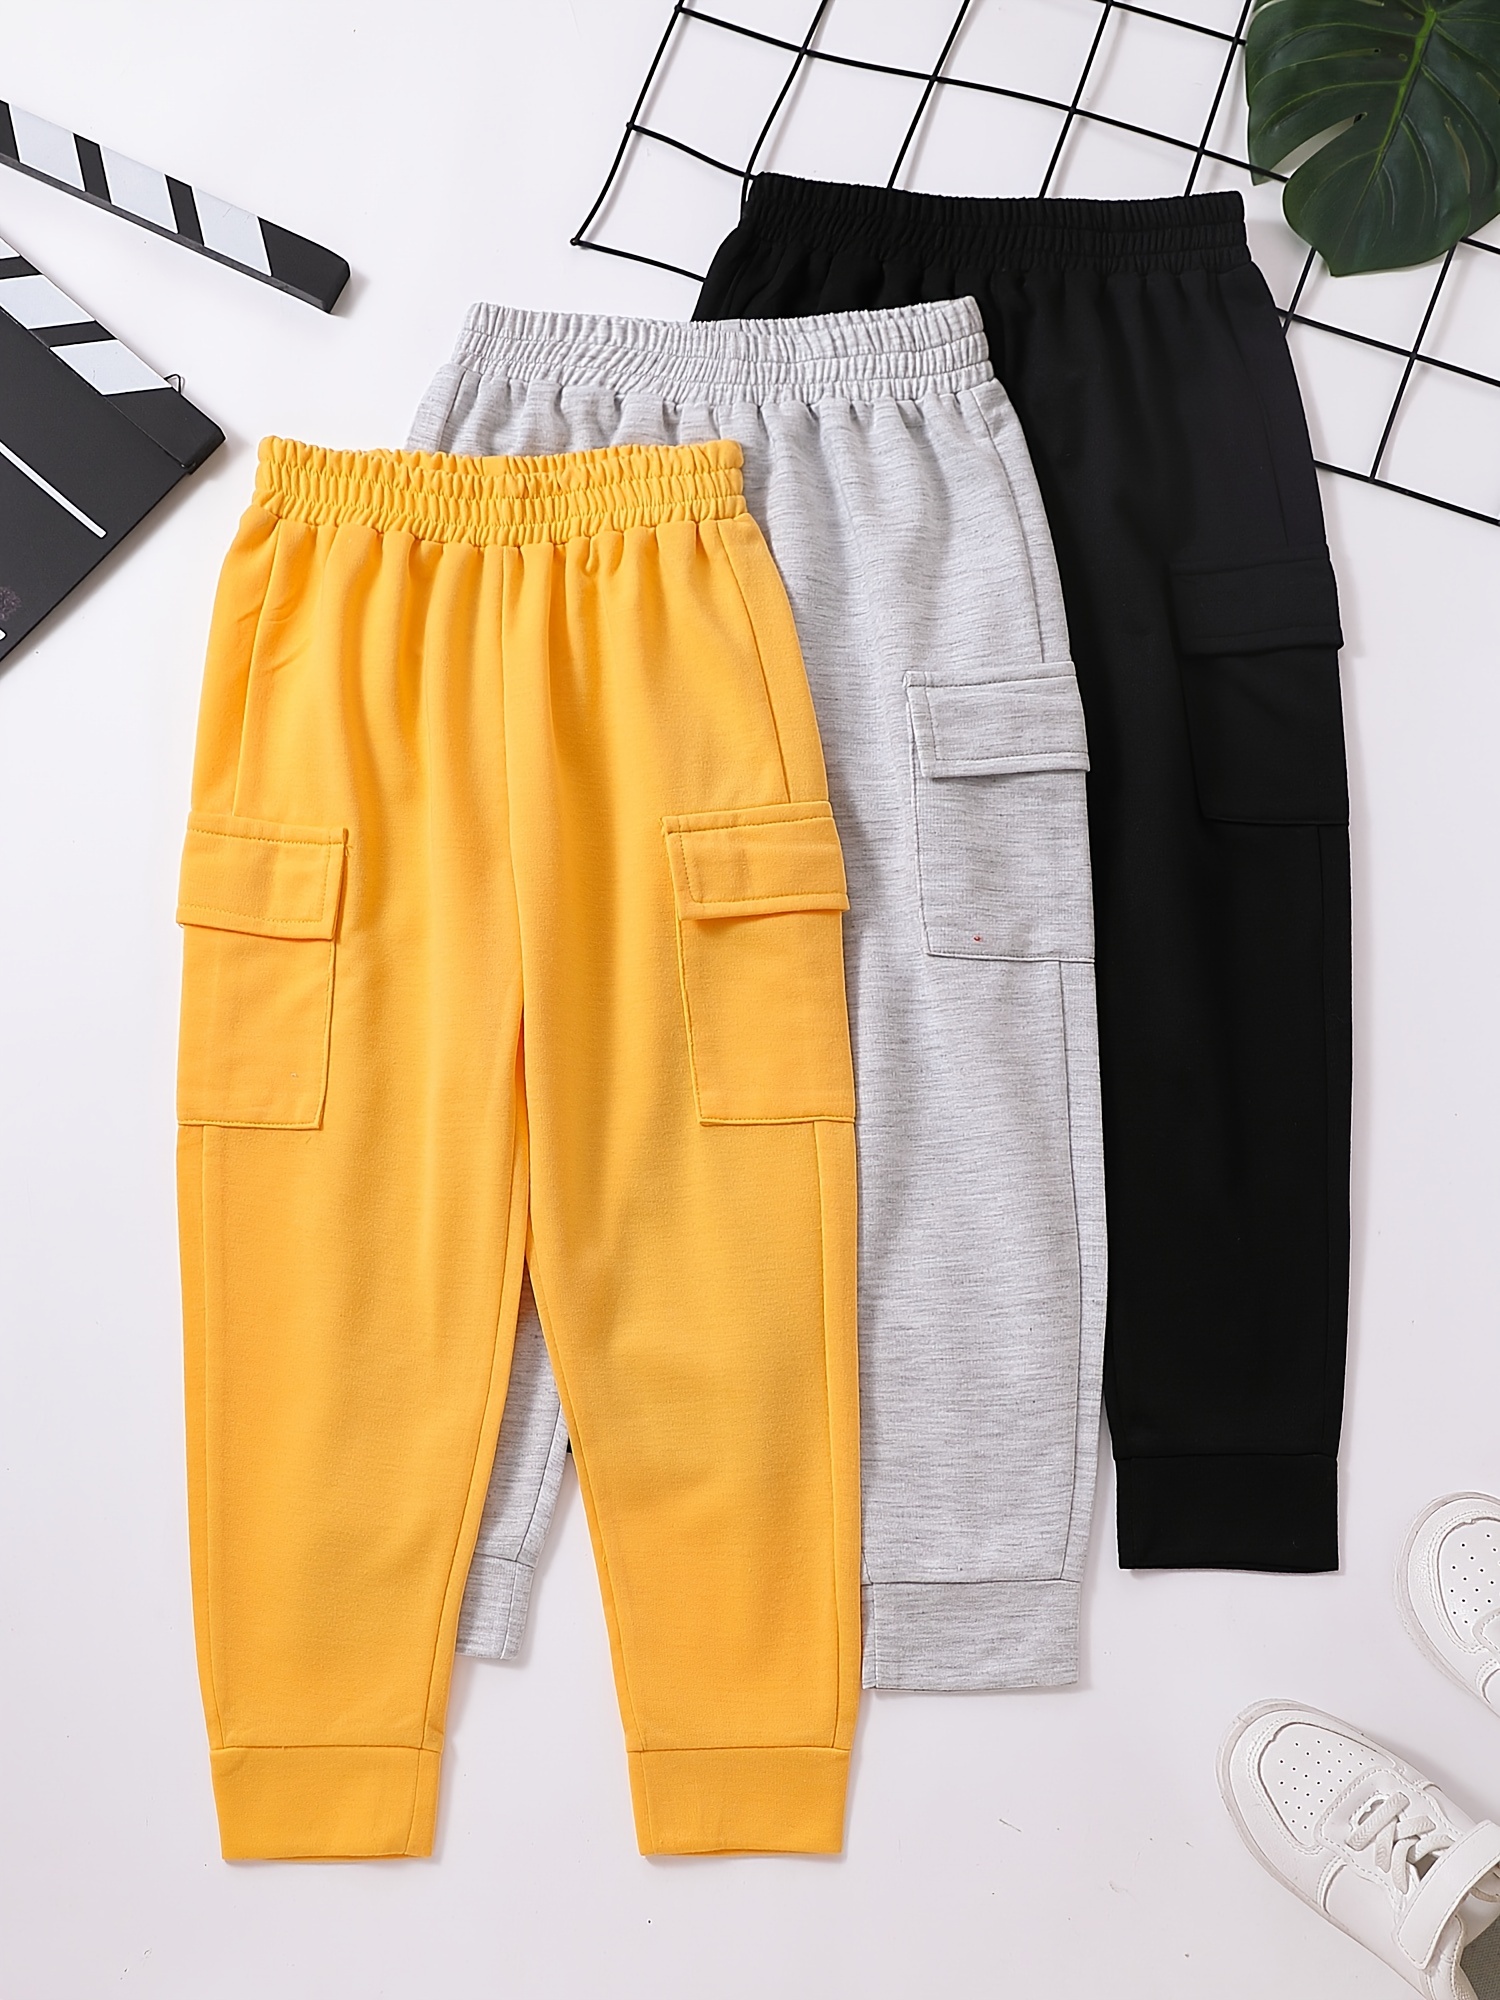 Teen Girls Functional Pocket Distressed Loose Casual Cargo Pants, Kids  Bottoms For Spring Summer Fall, Girl's Clothes